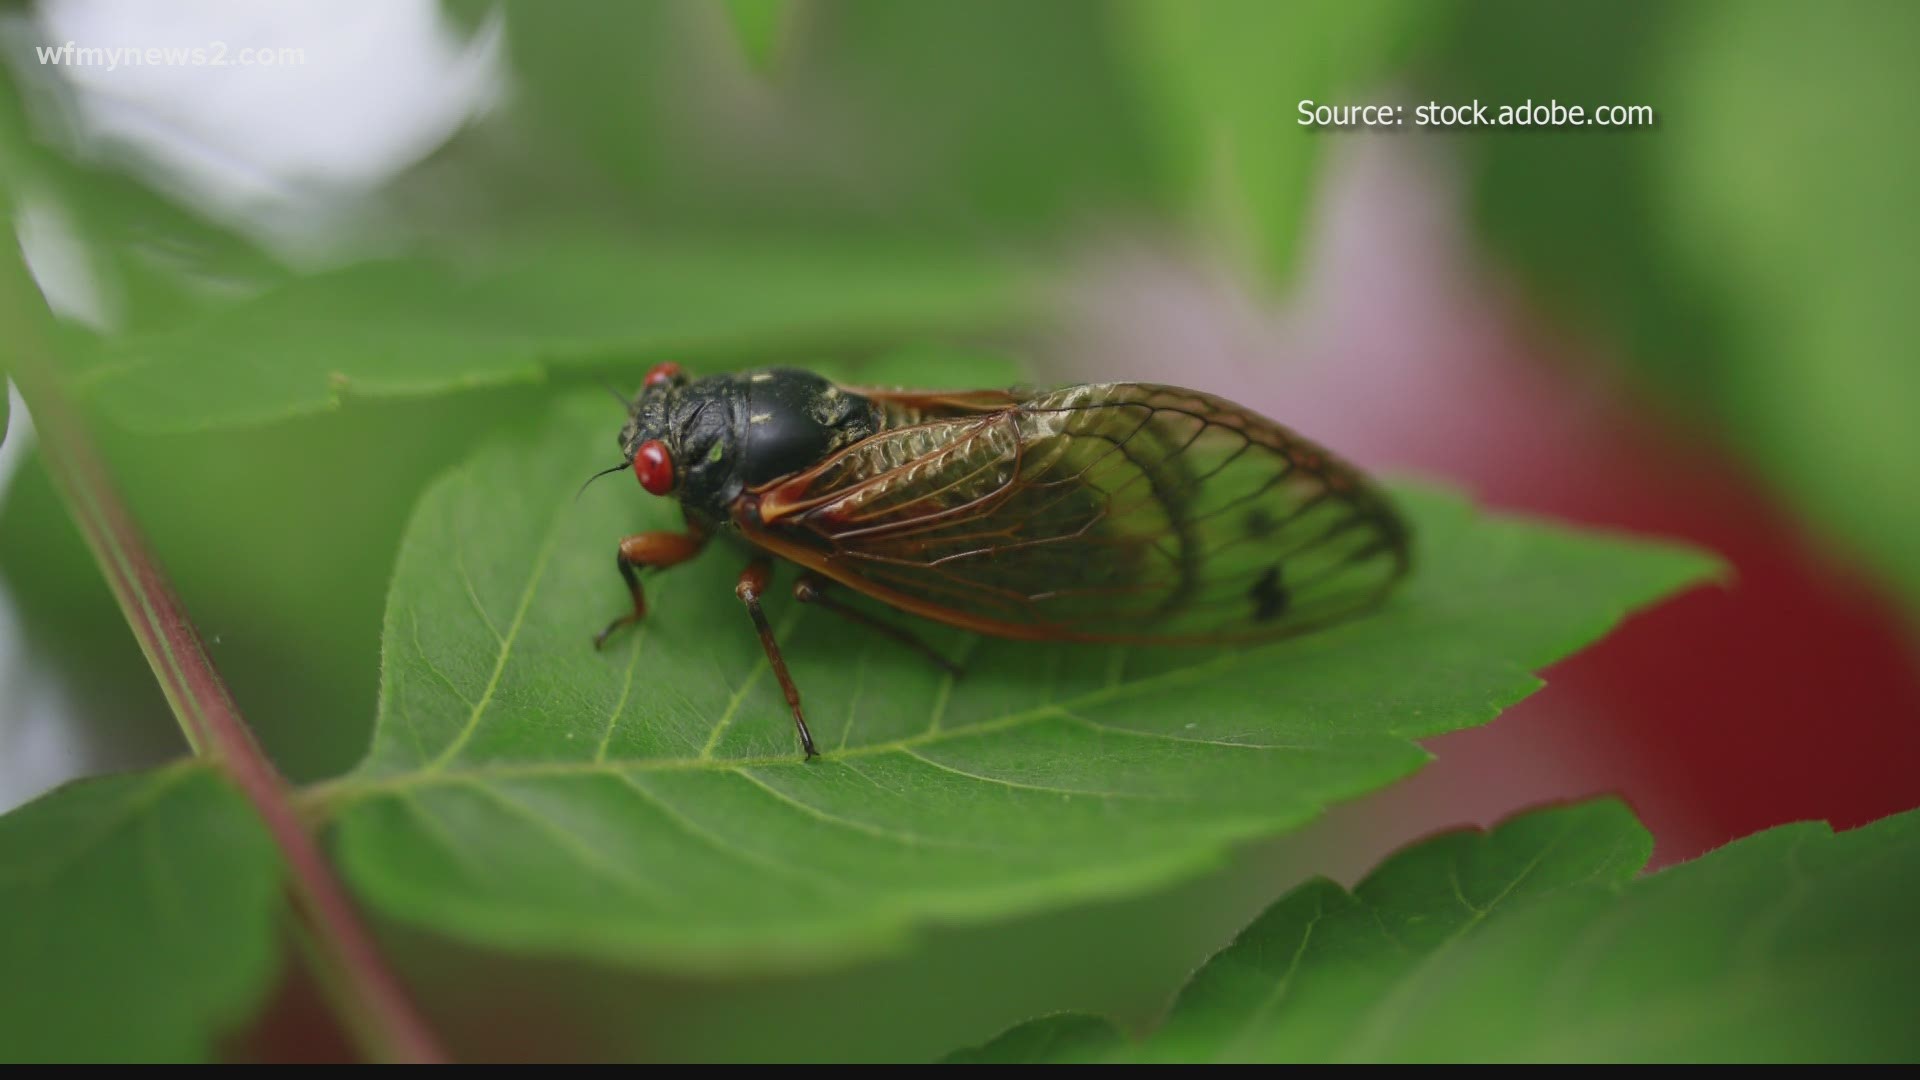 A local pest expert said frogs are causing the ‘ruckus’ right now, but Brood X cicadas will emerge this spring – after 17 years underground.